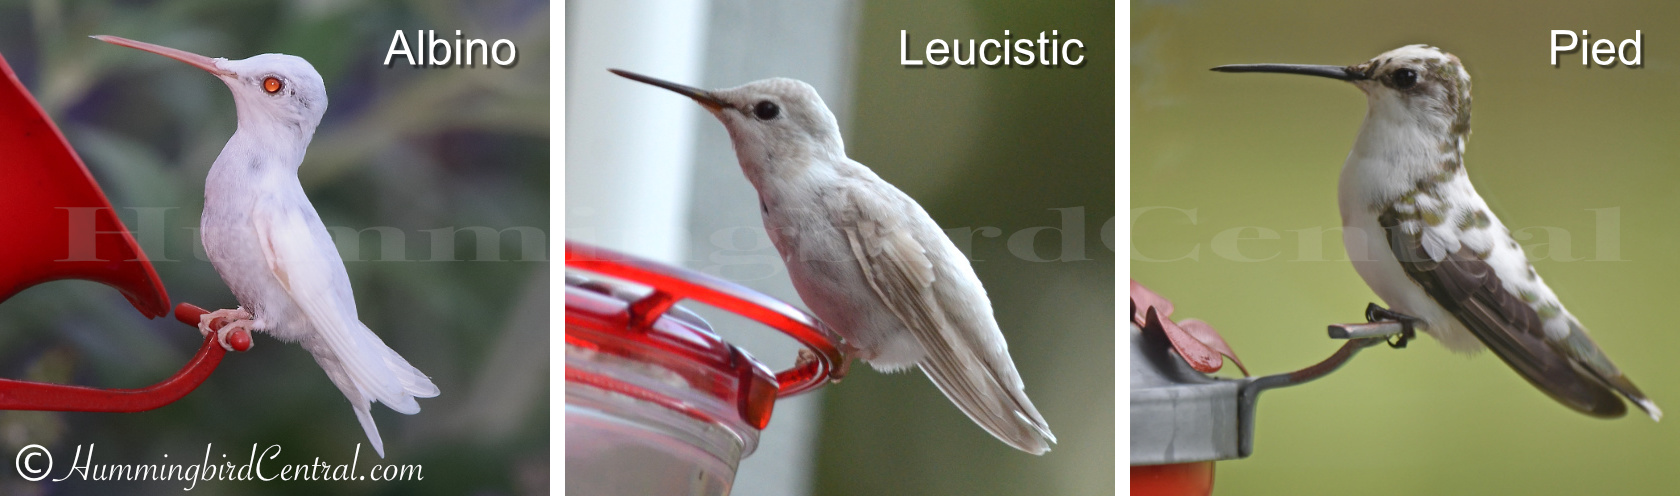 Side-by-side comparison of Albino, Leucistic and Pied Hummingbirds